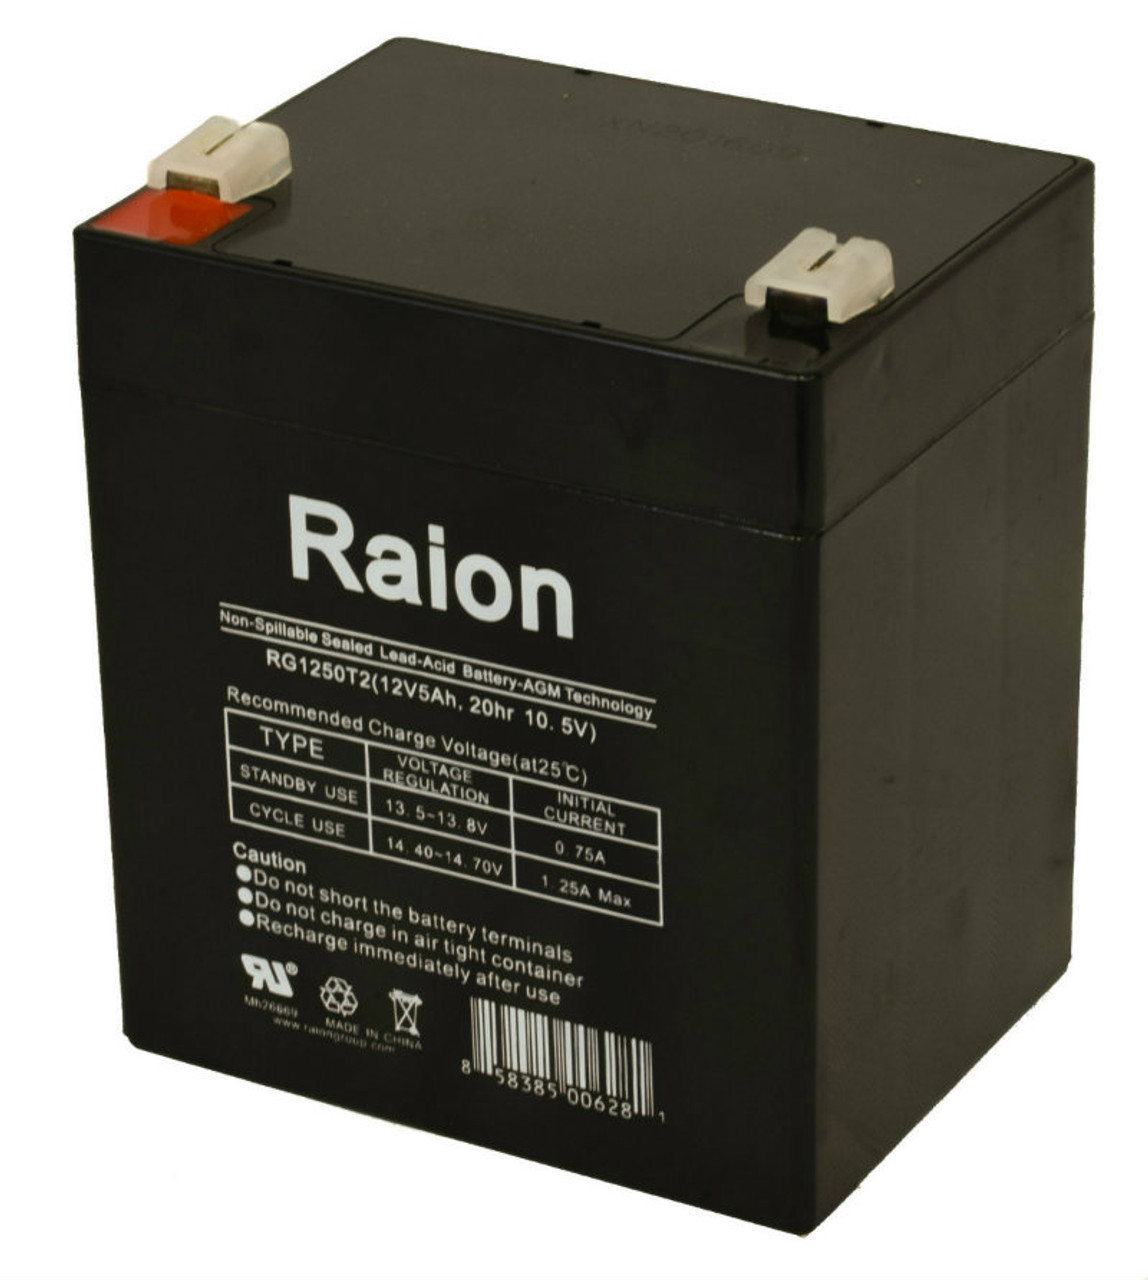 Raion Power RG1250T1 Replacement Battery for TN Power TN12-4.0 F1